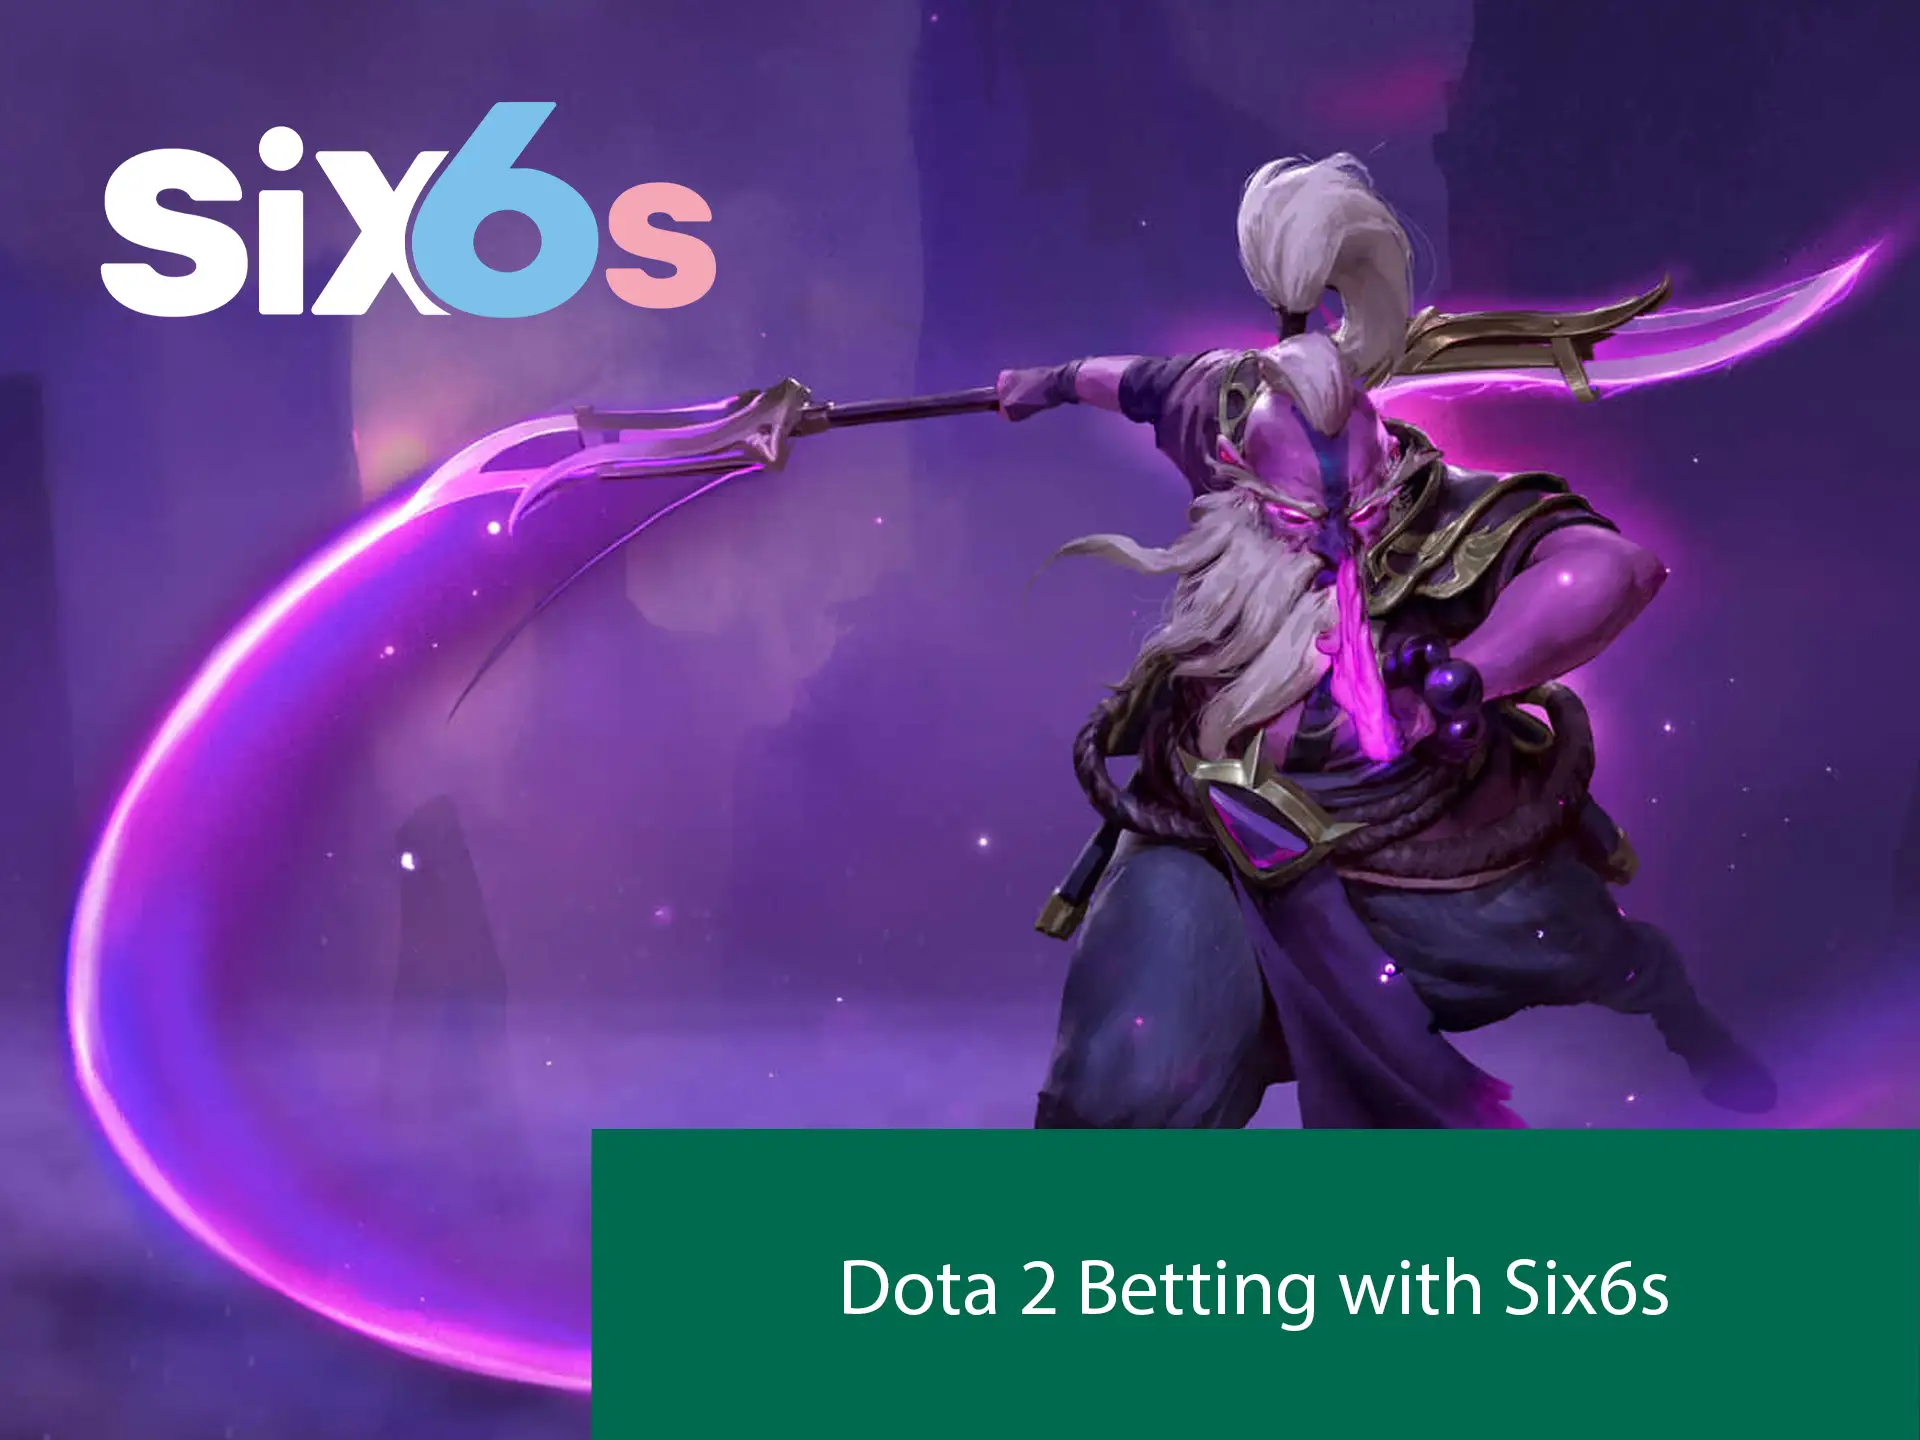 Cyber sports betting is available on the Six6s app and on all the most popular Dota 2 events.